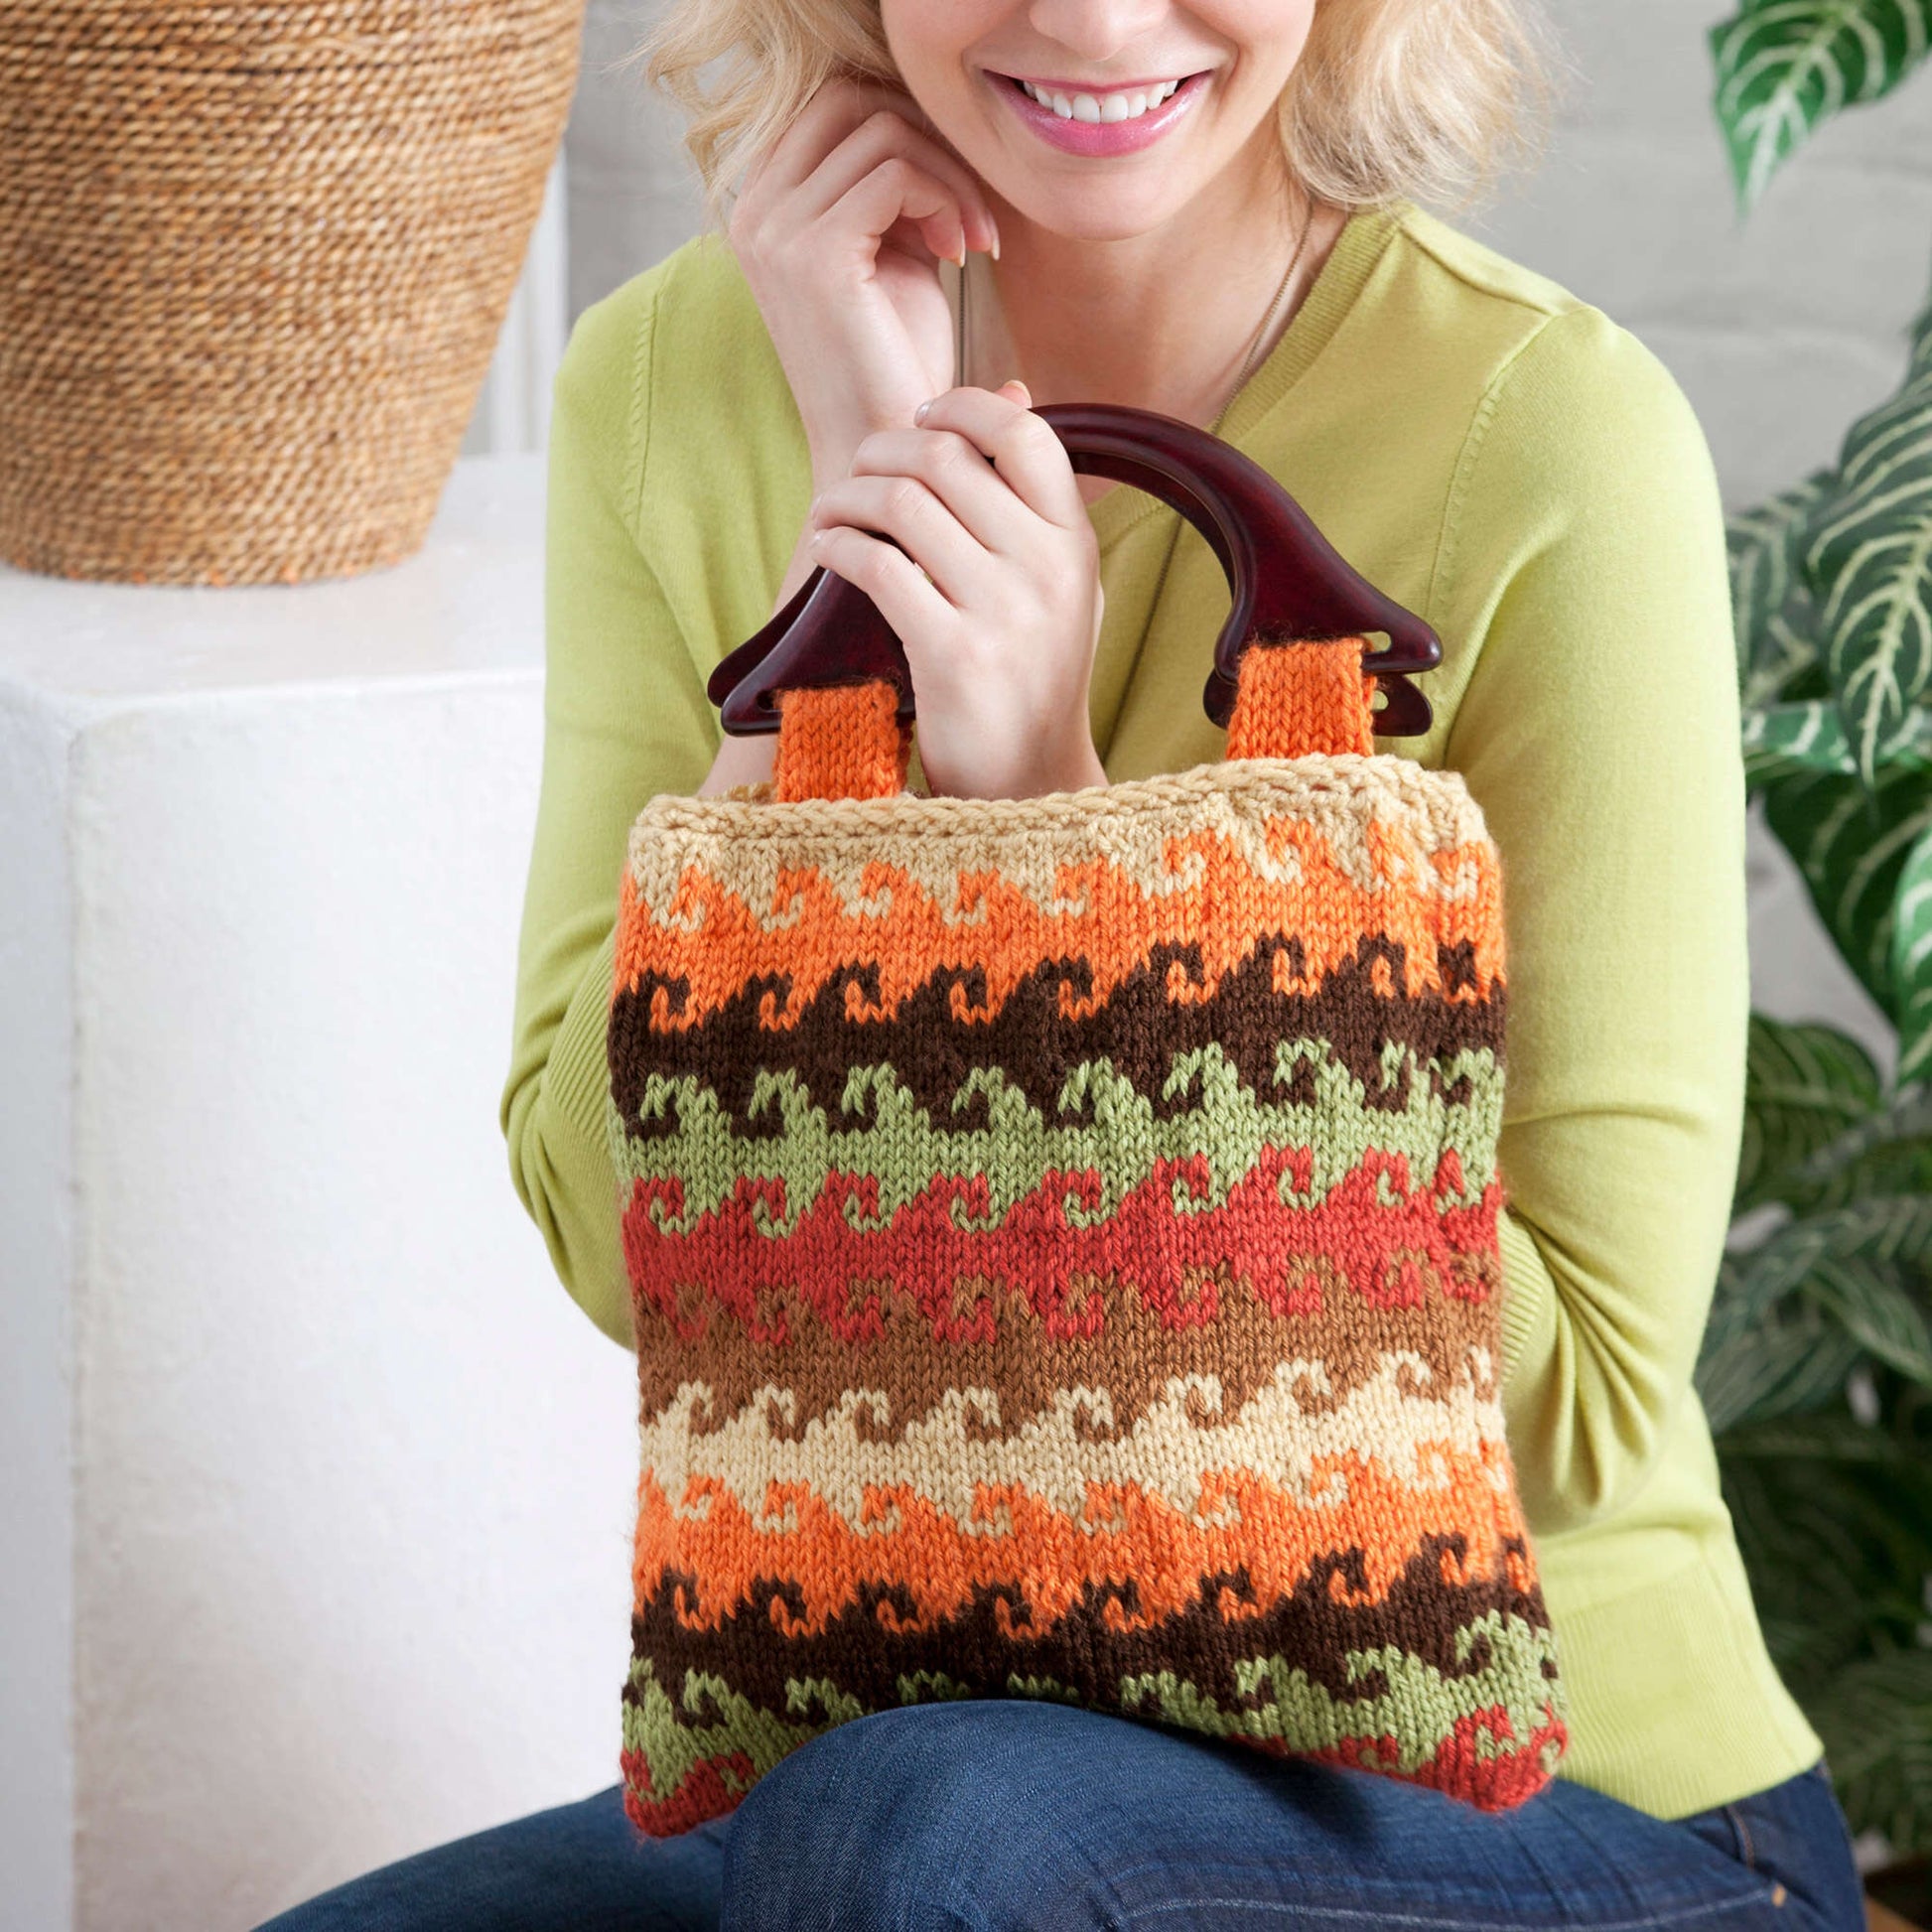 Free Red Heart Color Knit Bag Pattern